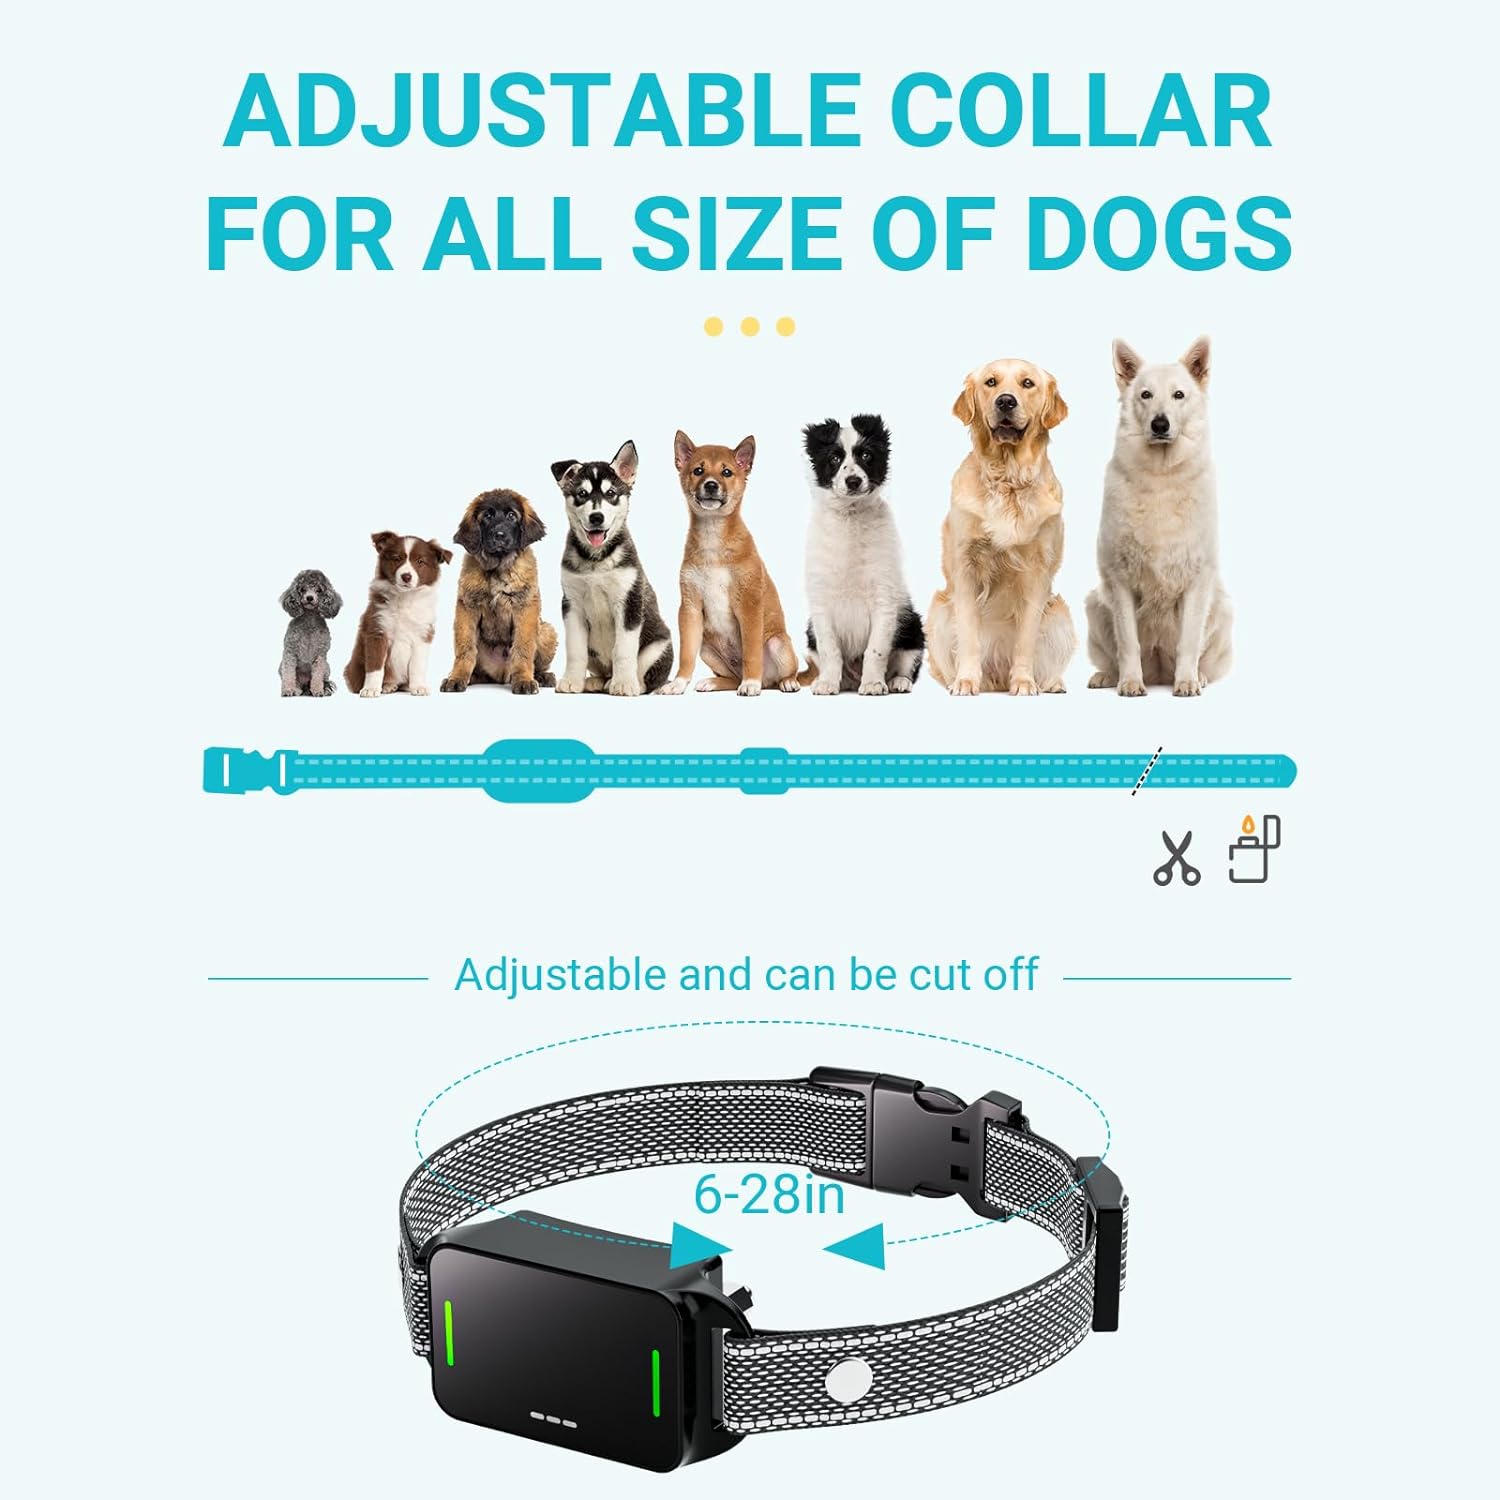 Dog Shock Collar-3300FT Dog Training Collar with Remote for Small Medium Large Dogs 8-120lbs,IP67 Waterproof Collars,Electric Dog Collar with Vibration,Beep,Safe Shock Modes